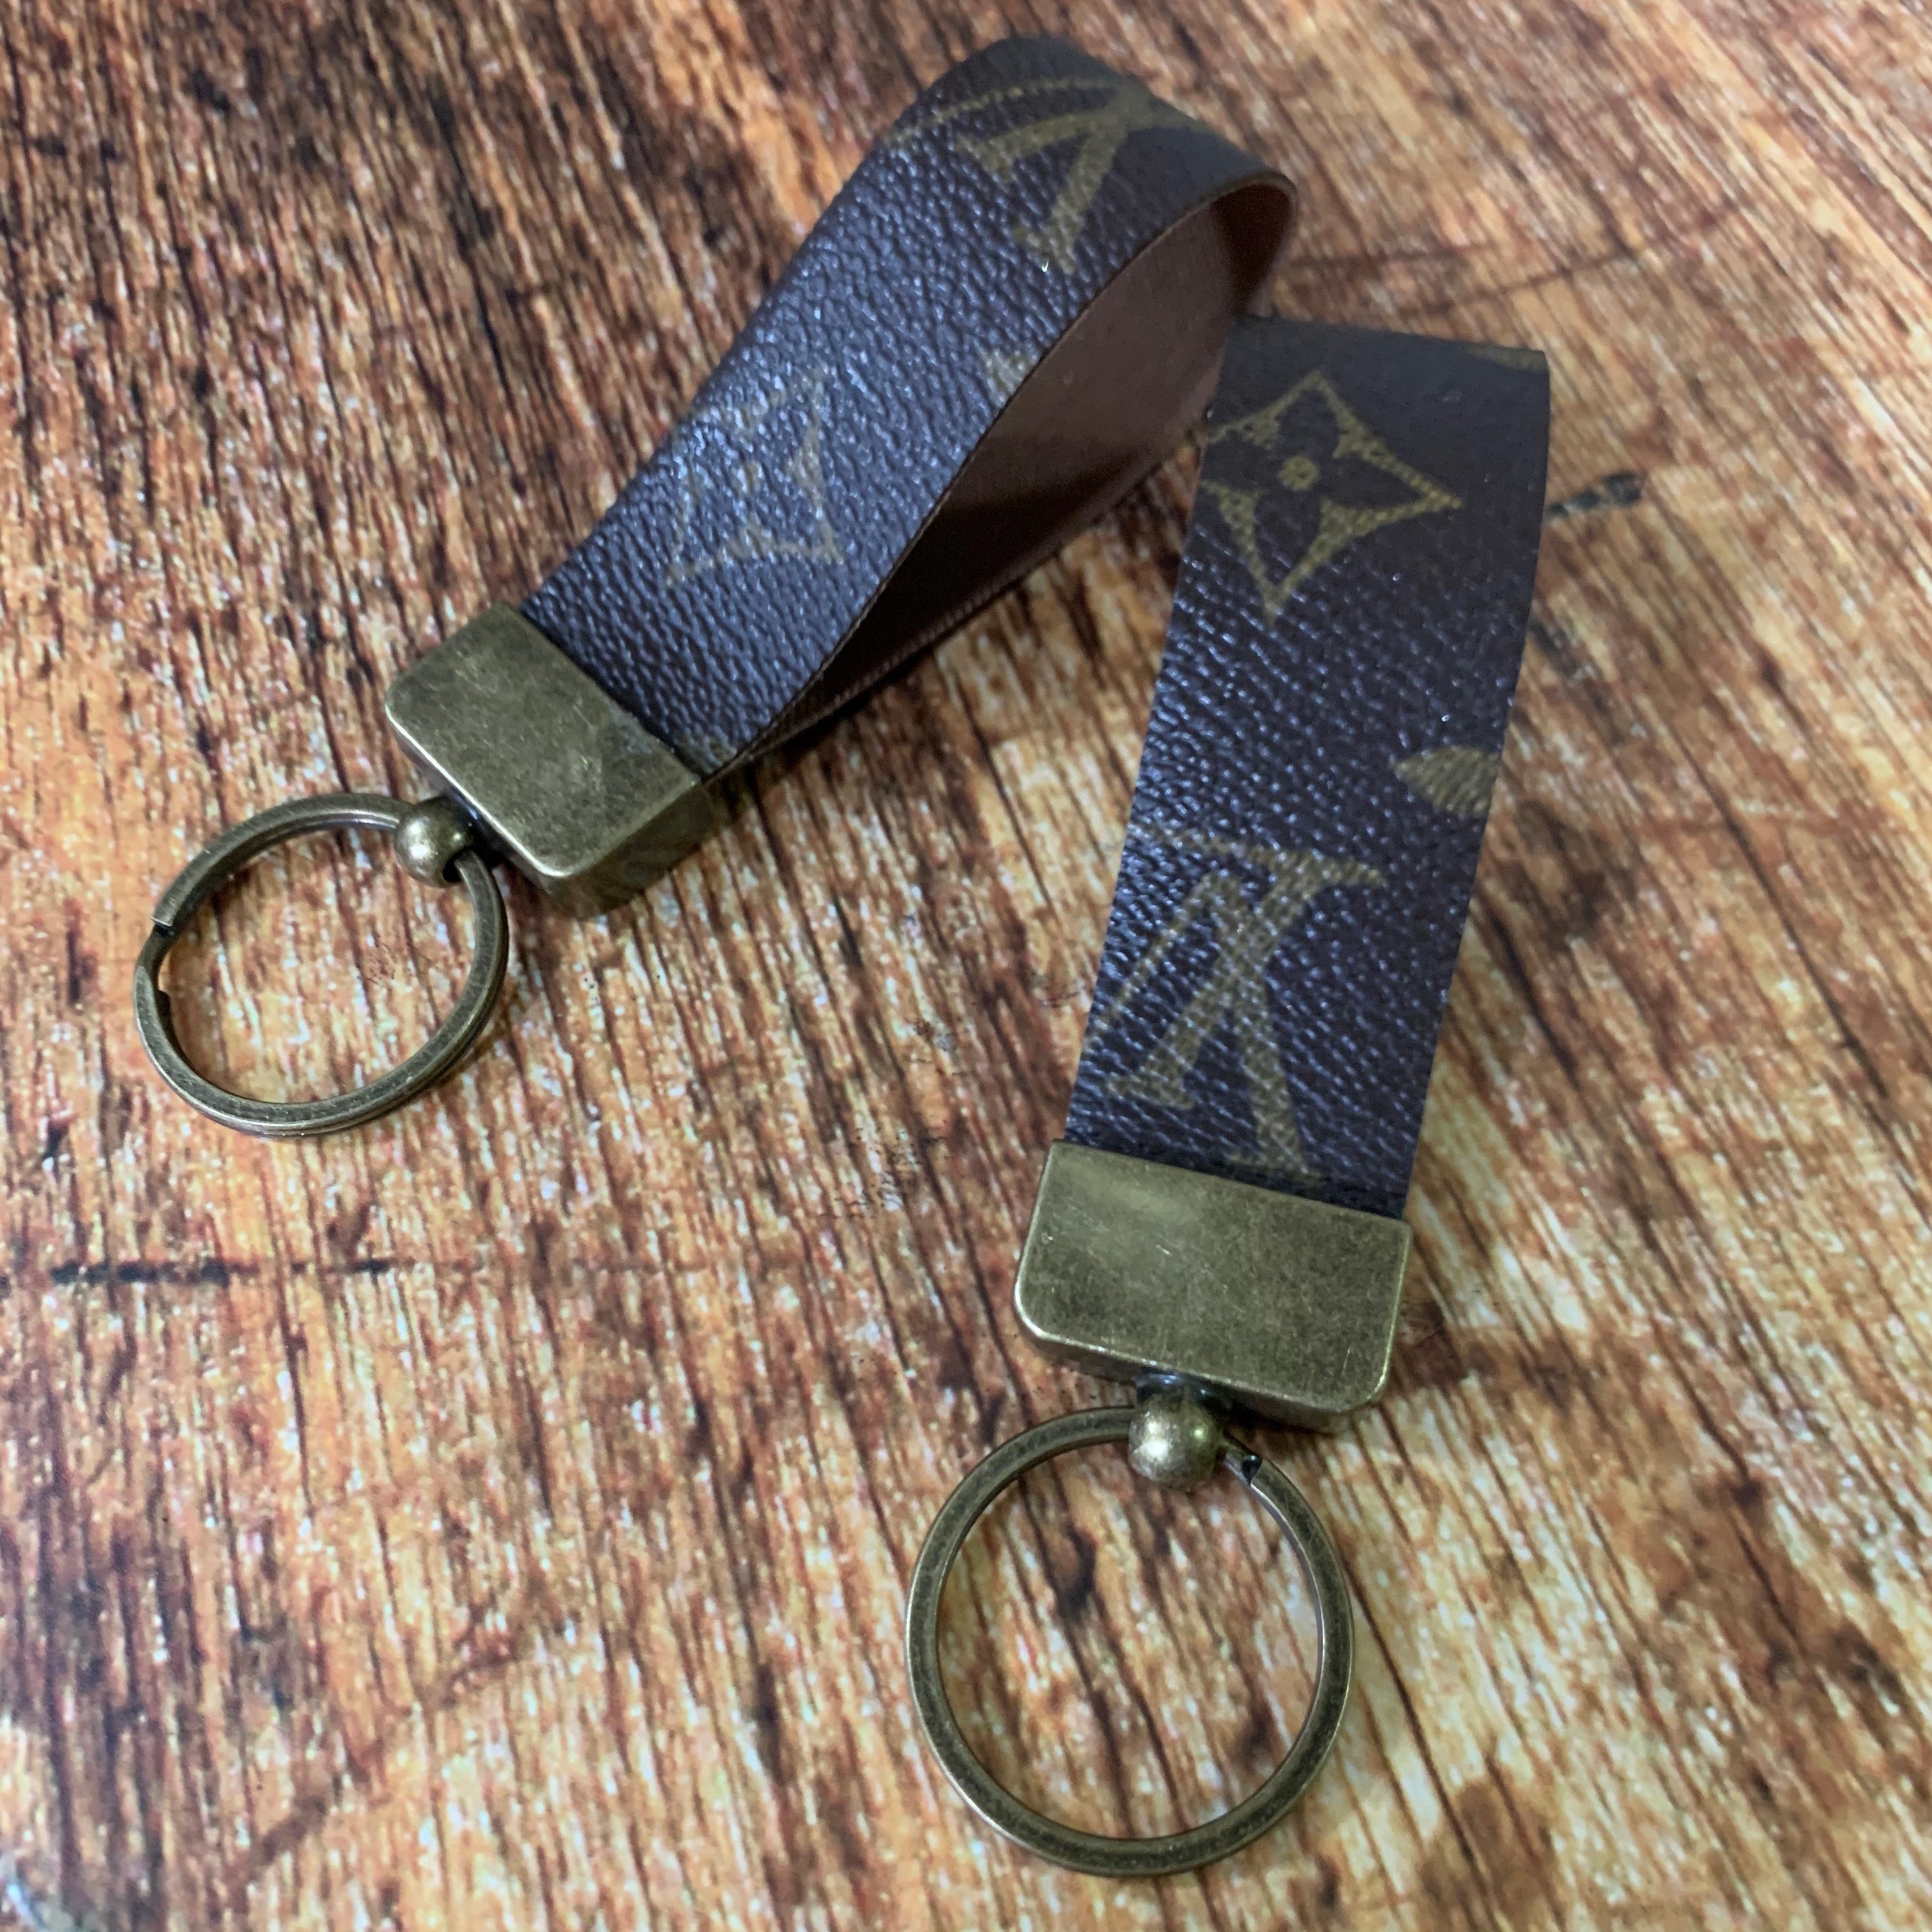 Repurposed Louis Vuitton Leather Key Chain – N.Kluger Designs